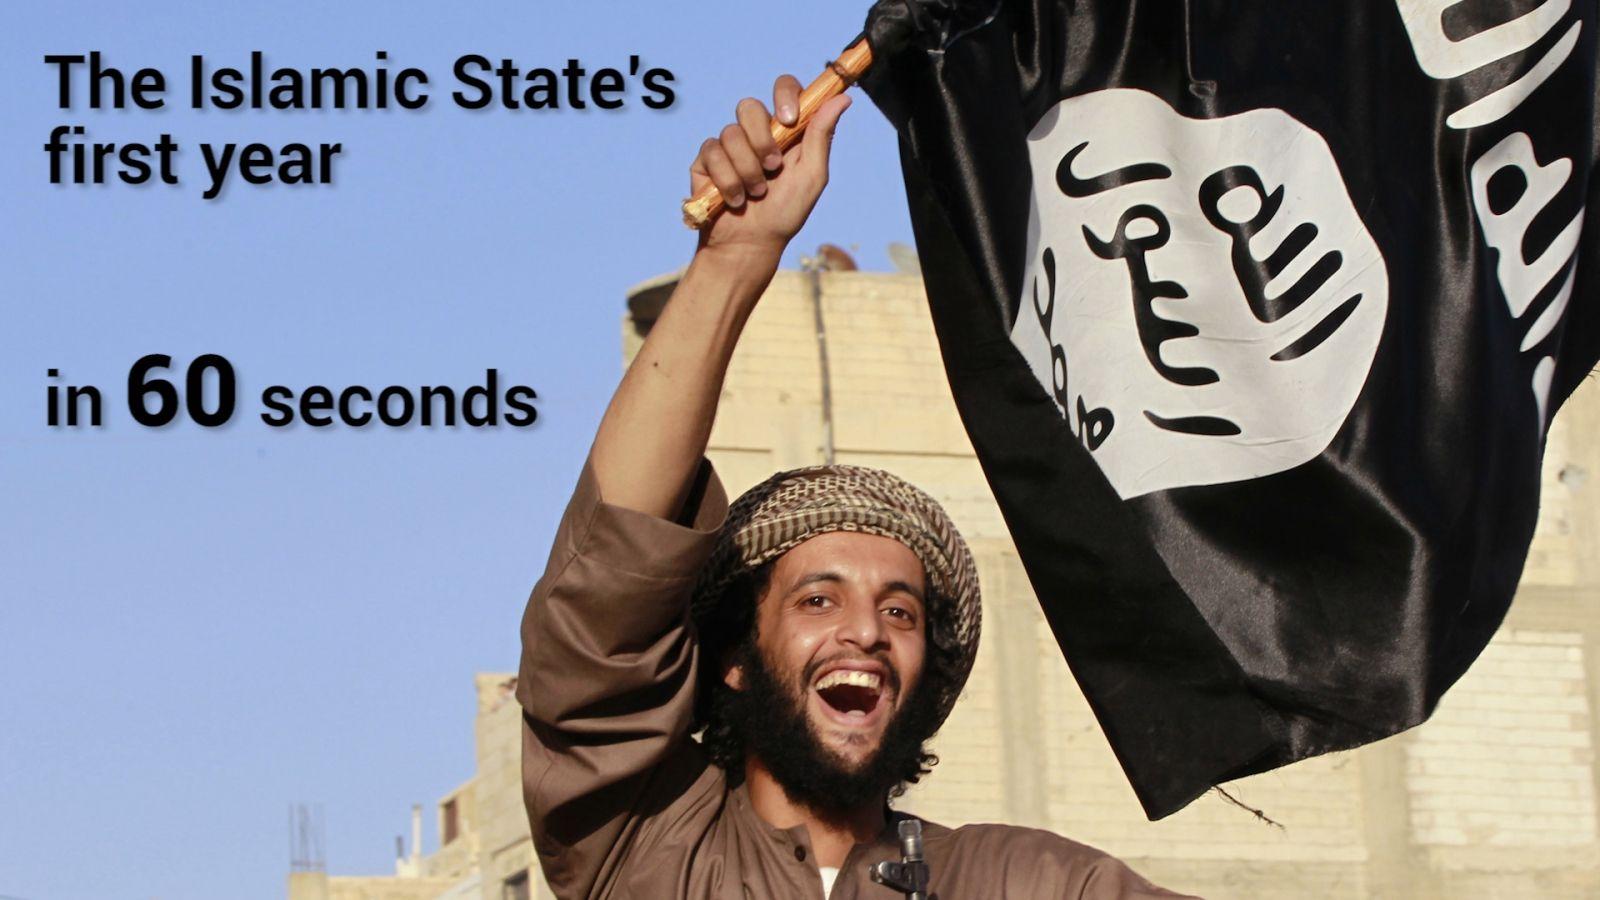 Isis: The Islamic State's first year in 60 seconds